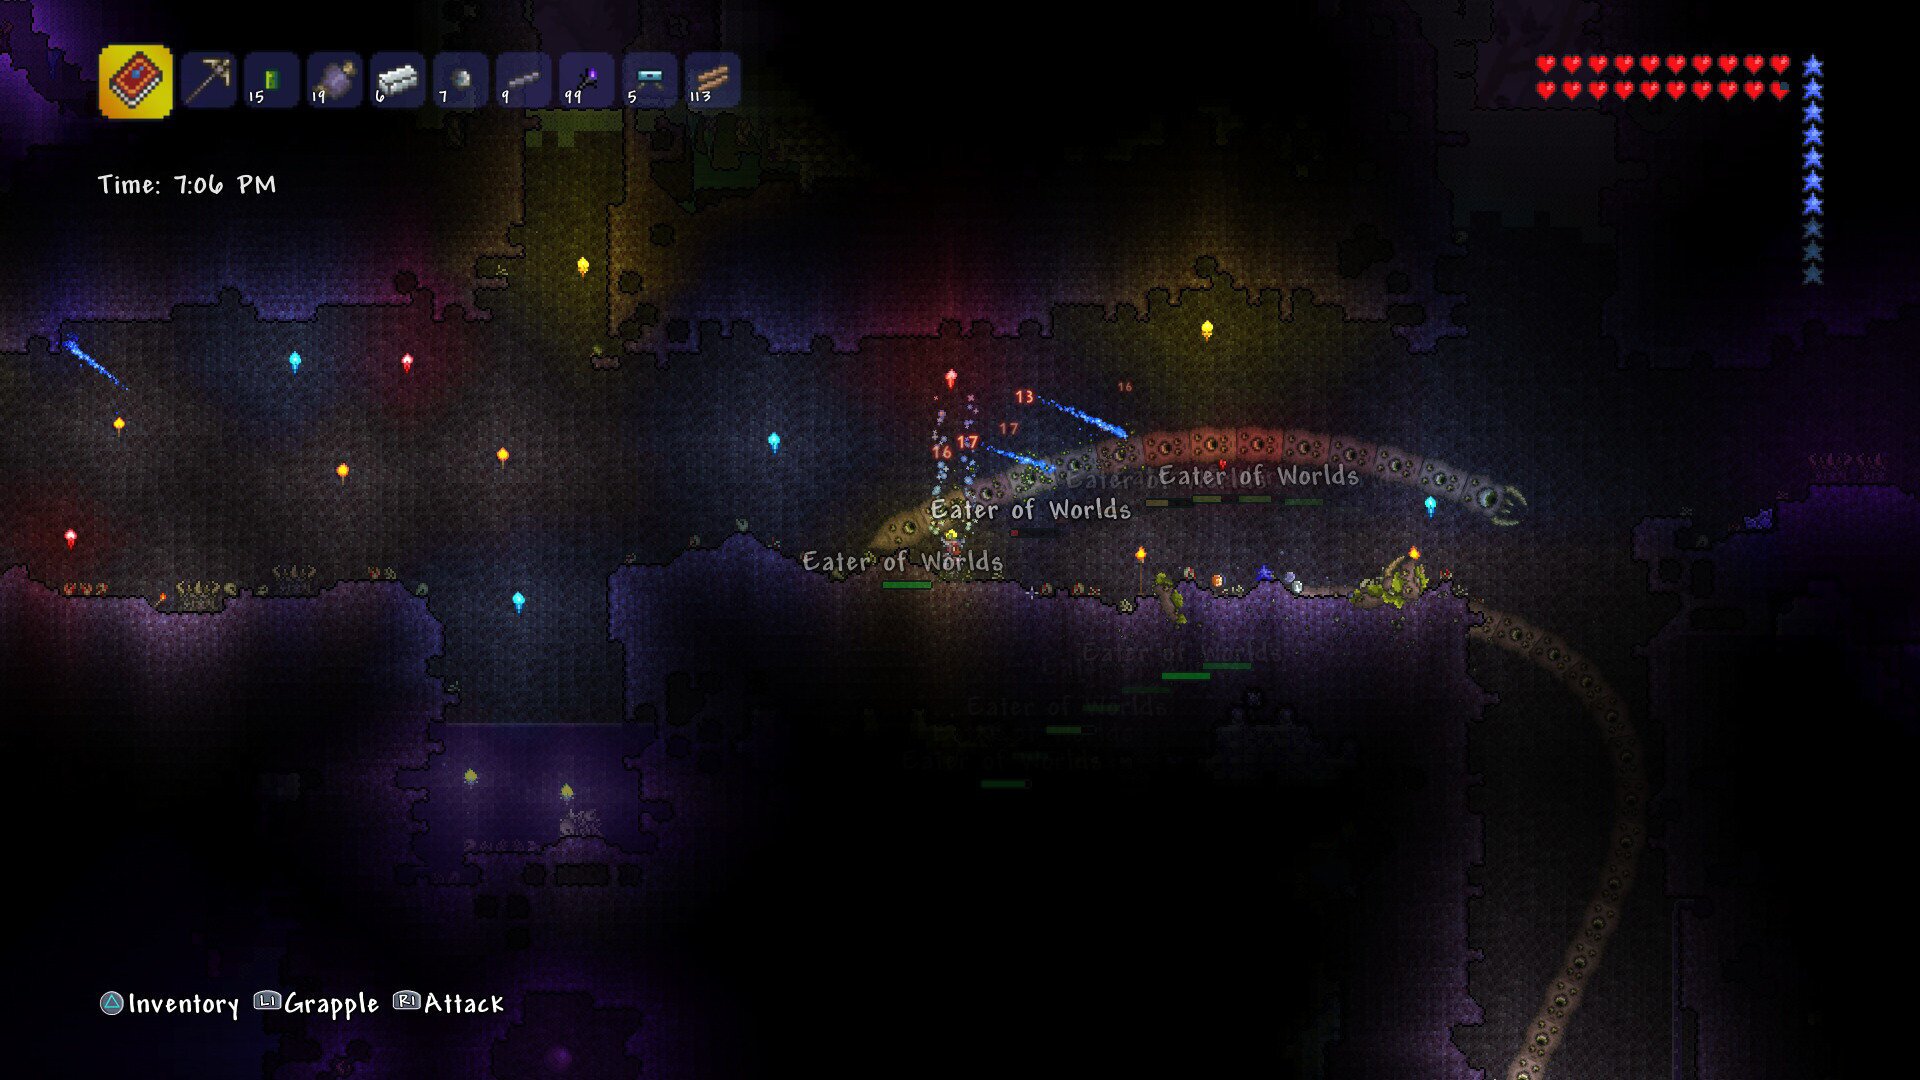 505 Games rules out Terraria for Wii U